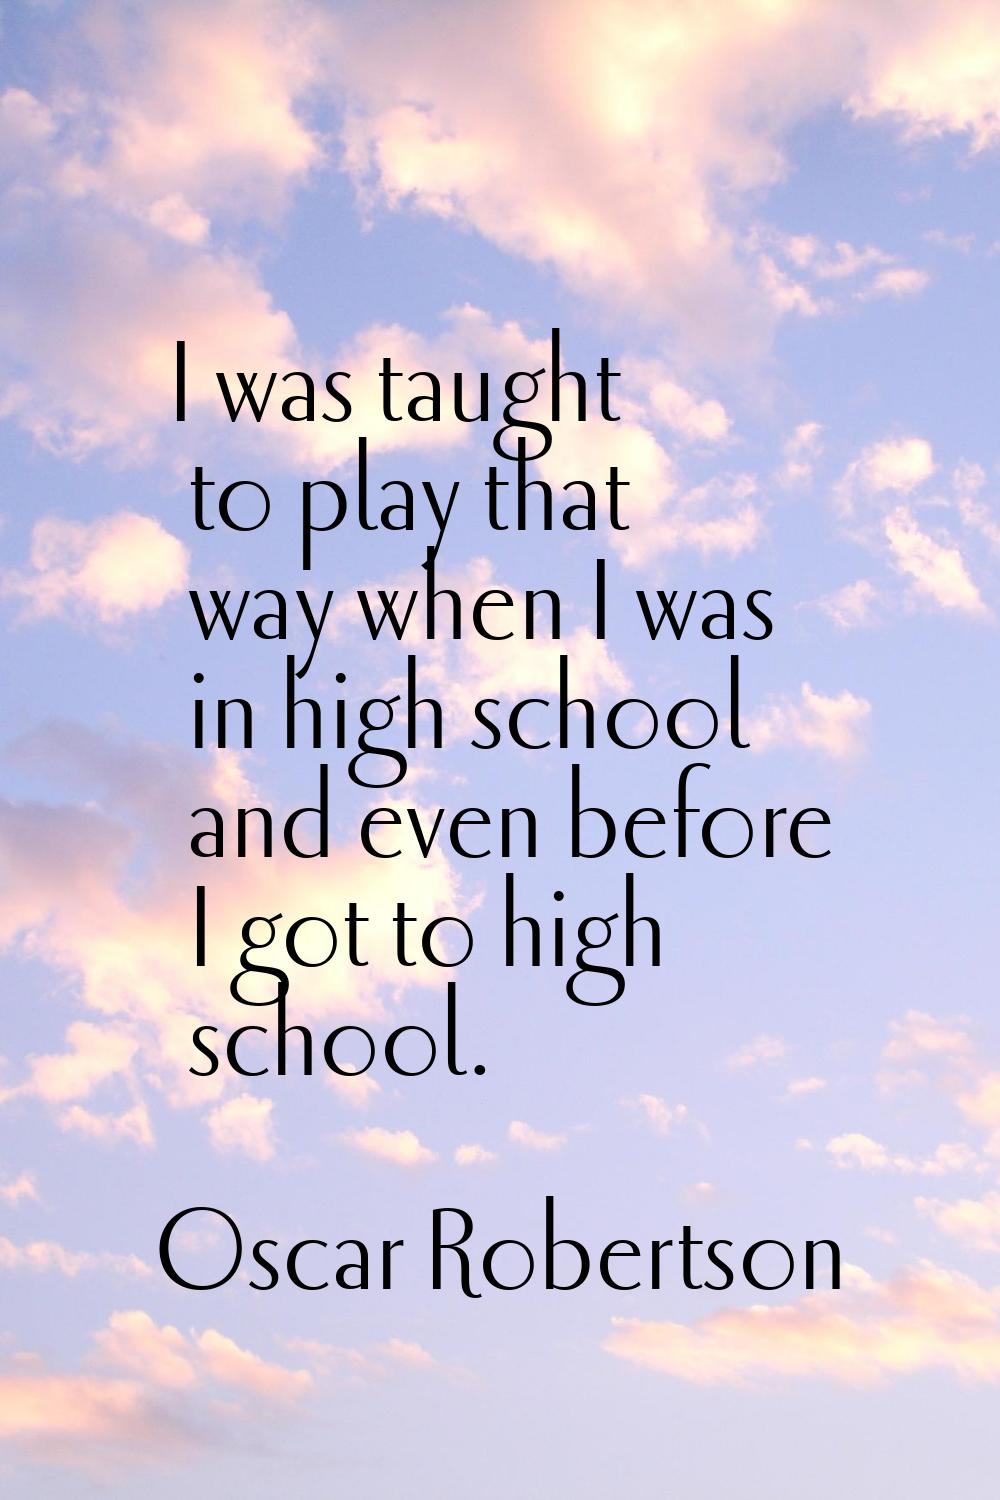 I was taught to play that way when I was in high school and even before I got to high school.